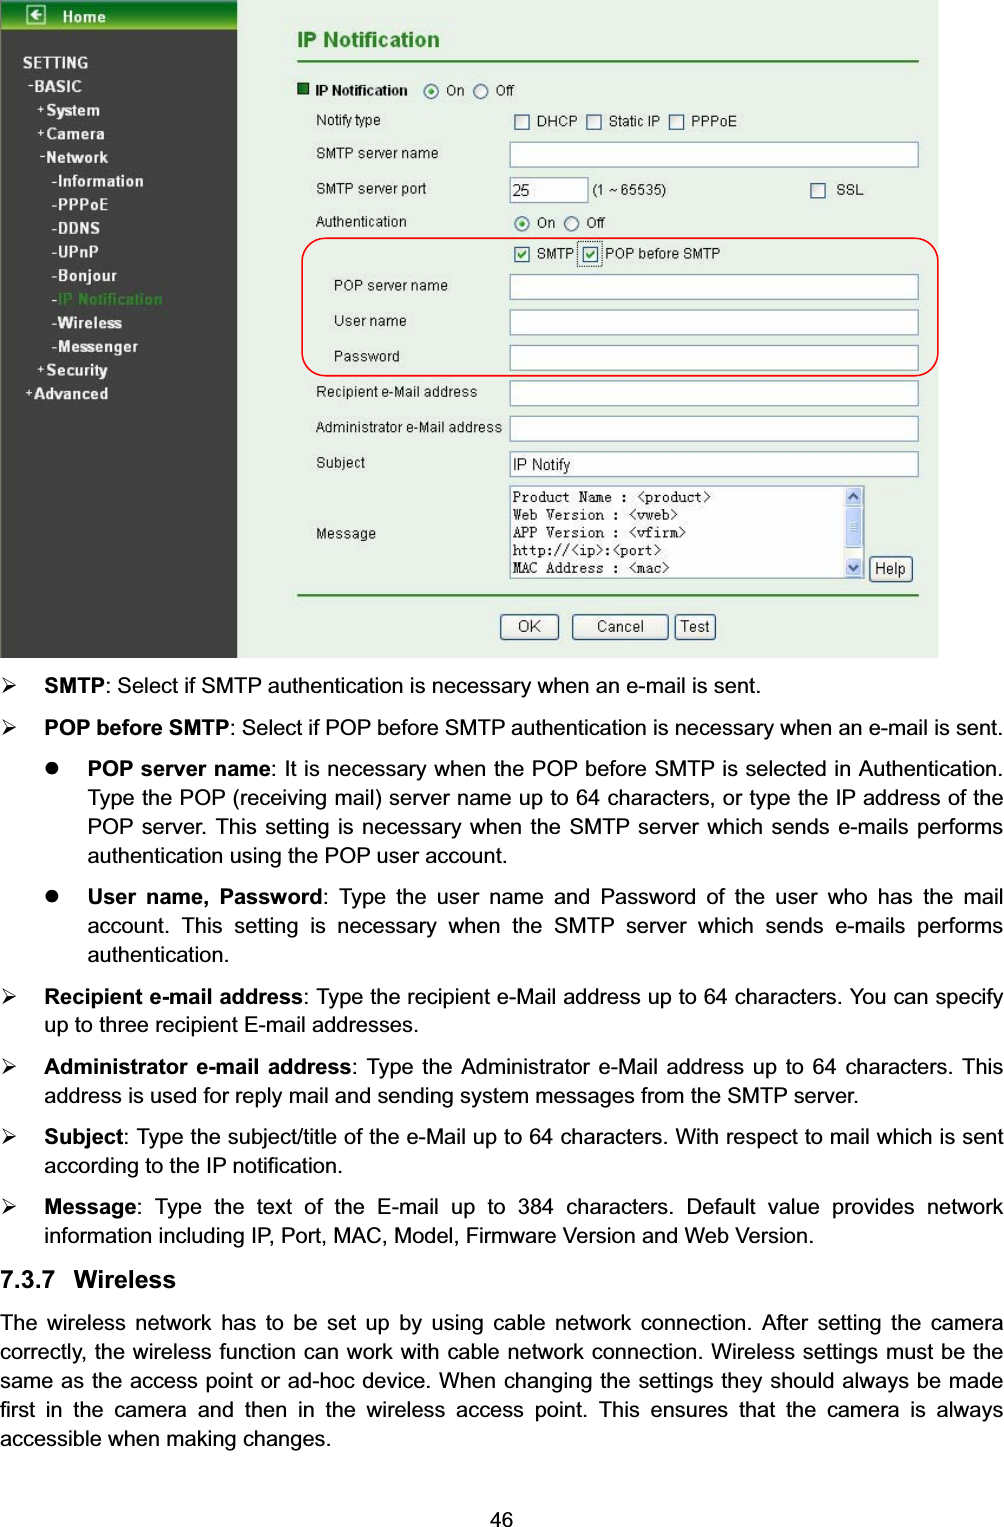  46  ¾ SMTP: Select if SMTP authentication is necessary when an e-mail is sent. ¾ POP before SMTP: Select if POP before SMTP authentication is necessary when an e-mail is sent. z POP server name: It is necessary when the POP before SMTP is selected in Authentication. Type the POP (receiving mail) server name up to 64 characters, or type the IP address of the POP server. This setting is necessary when the SMTP server which sends e-mails performs authentication using the POP user account.   z User name, Password: Type the user name and Password of the user who has the mail account. This setting is necessary when the SMTP server which sends e-mails performs authentication. ¾ Recipient e-mail address: Type the recipient e-Mail address up to 64 characters. You can specify up to three recipient E-mail addresses. ¾ Administrator e-mail address: Type the Administrator e-Mail address up to 64 characters. This address is used for reply mail and sending system messages from the SMTP server. ¾ Subject: Type the subject/title of the e-Mail up to 64 characters. With respect to mail which is sent according to the IP notification. ¾ Message: Type the text of the E-mail up to 384 characters. Default value provides network information including IP, Port, MAC, Model, Firmware Version and Web Version. 7.3.7 Wireless The wireless network has to be set up by using cable network connection. After setting the camera correctly, the wireless function can work with cable network connection. Wireless settings must be the same as the access point or ad-hoc device. When changing the settings they should always be made first in the camera and then in the wireless access point. This ensures that the camera is always accessible when making changes.   